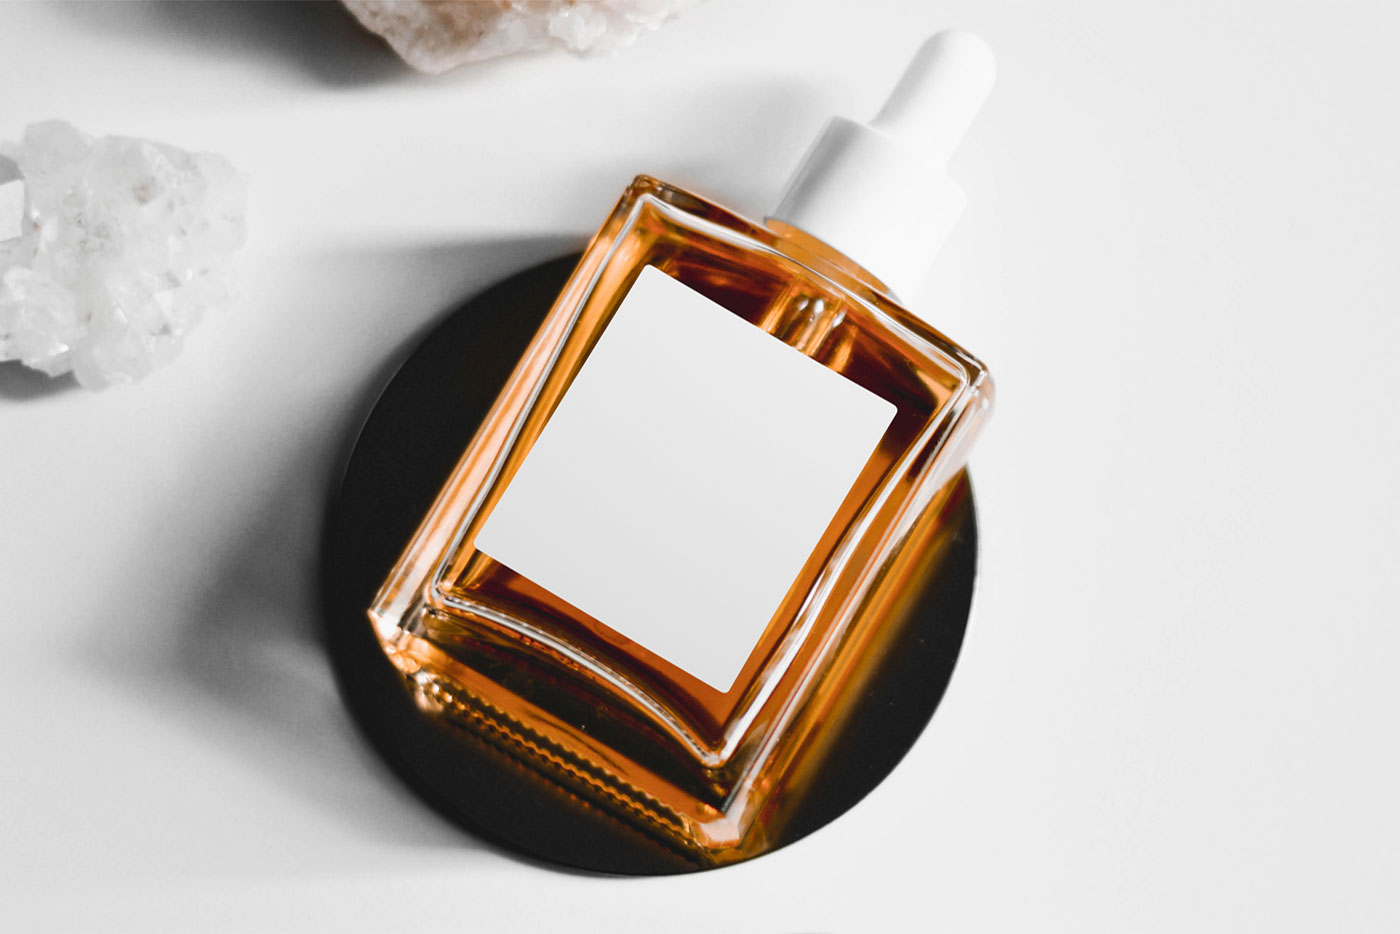 Top View of Perfume Flacon Bottle Mockup FREE PSD